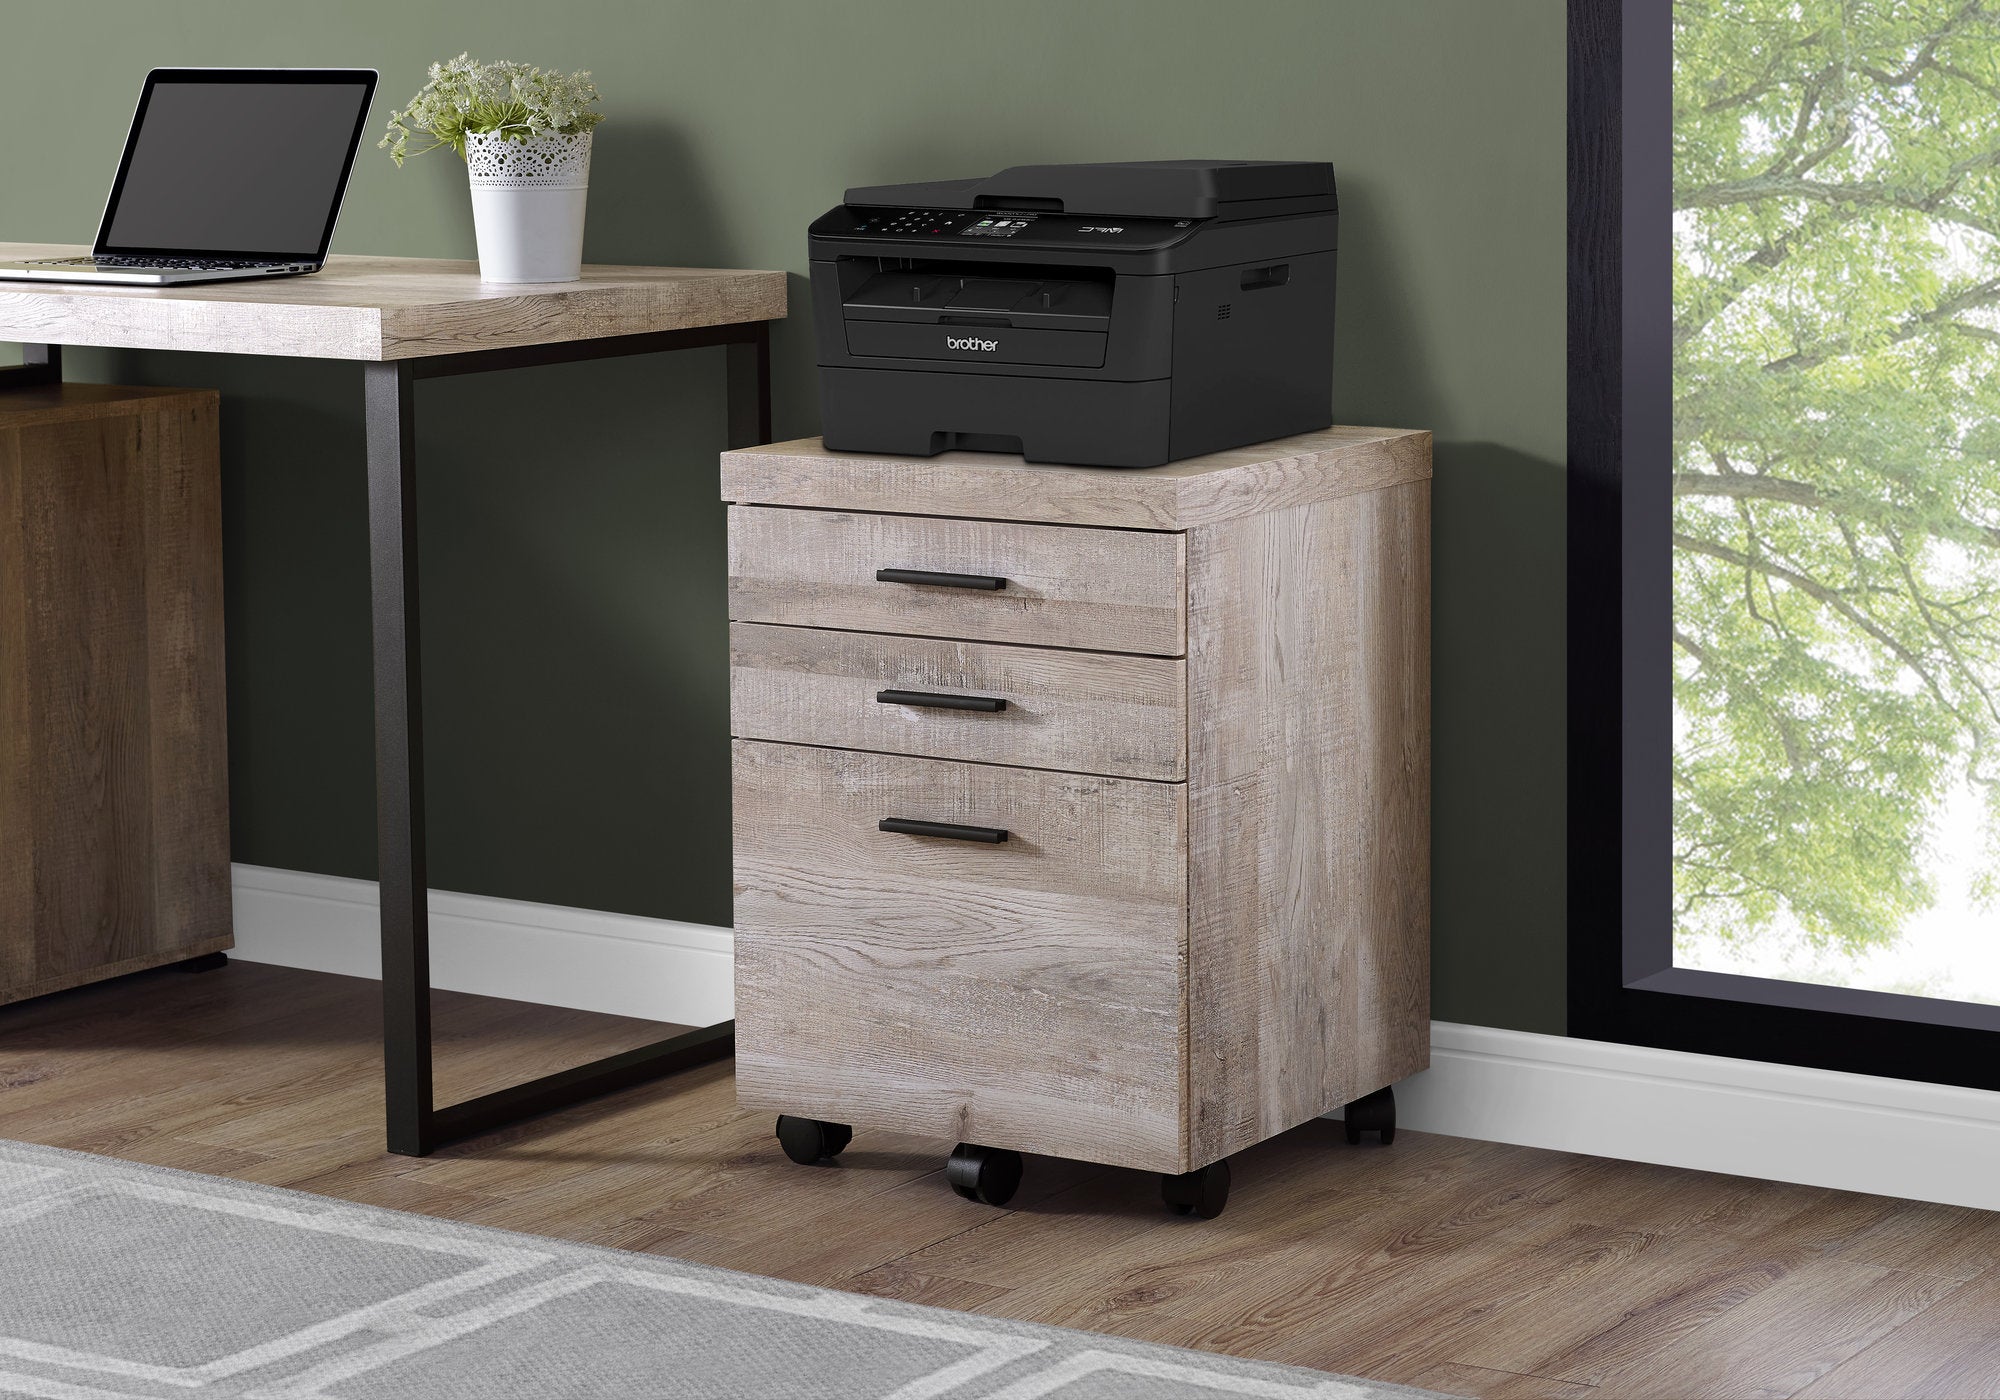 MN-687402    File Cabinet, Rolling Mobile, Storage, Printer Stand, Wood File Cabinet, Office, Mdf, Taupe Reclaimed Wood Look, Black, Contemporary, Modern